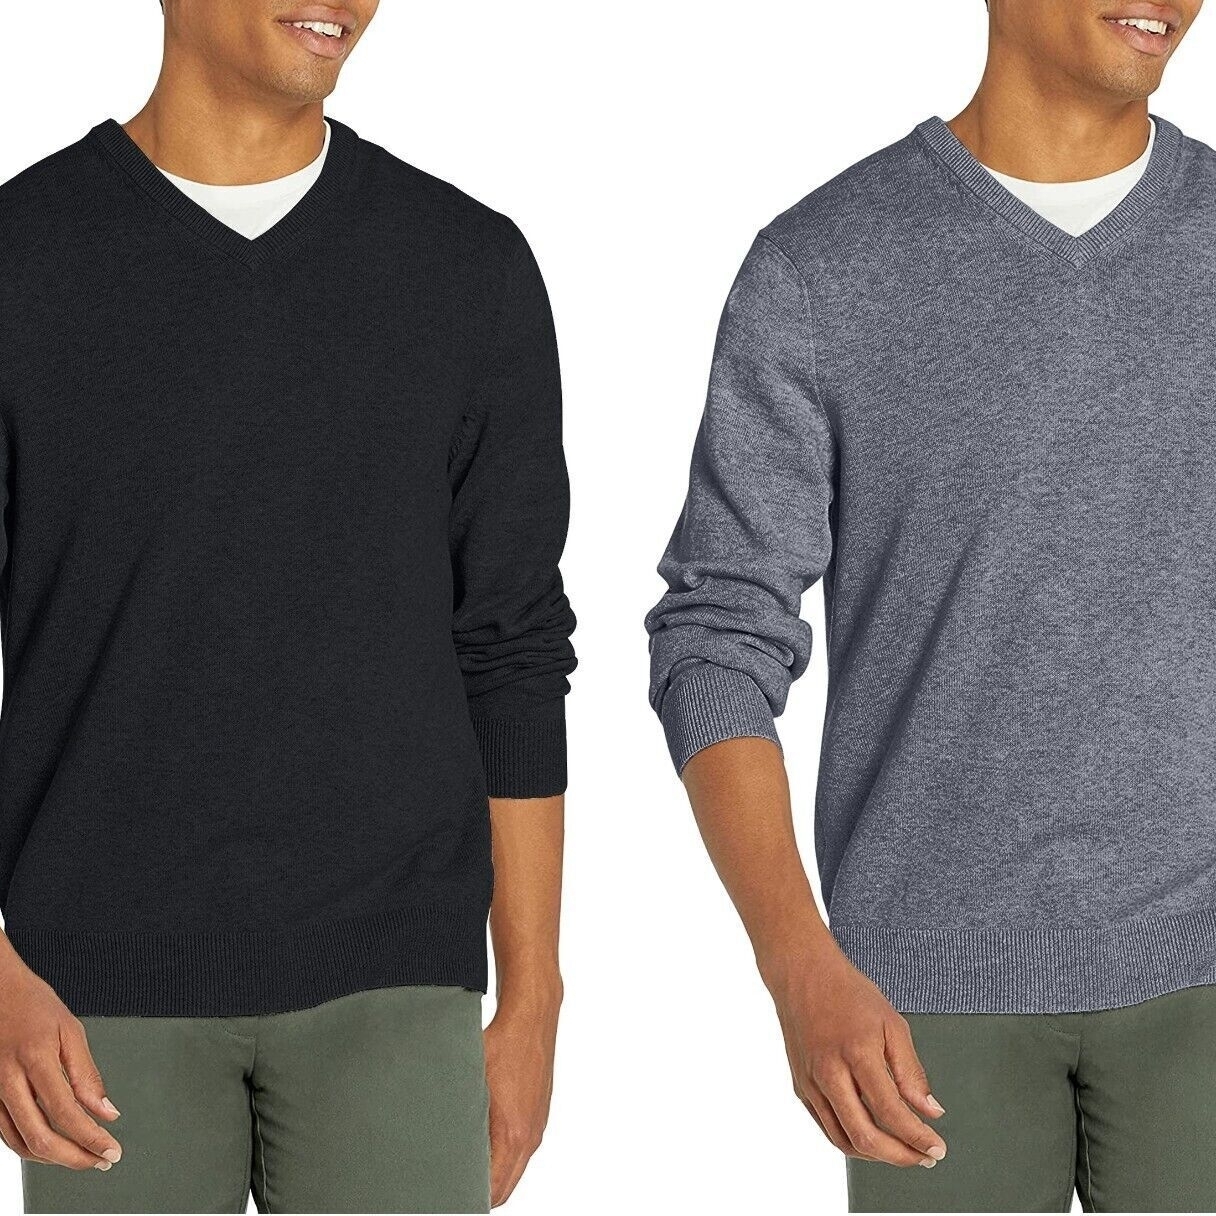 2-Pack Men's Casual Cozy Ultra Soft Slim Fit Warm Knit Pullover V-Neck Sweater - Black&Grey, XX-Large